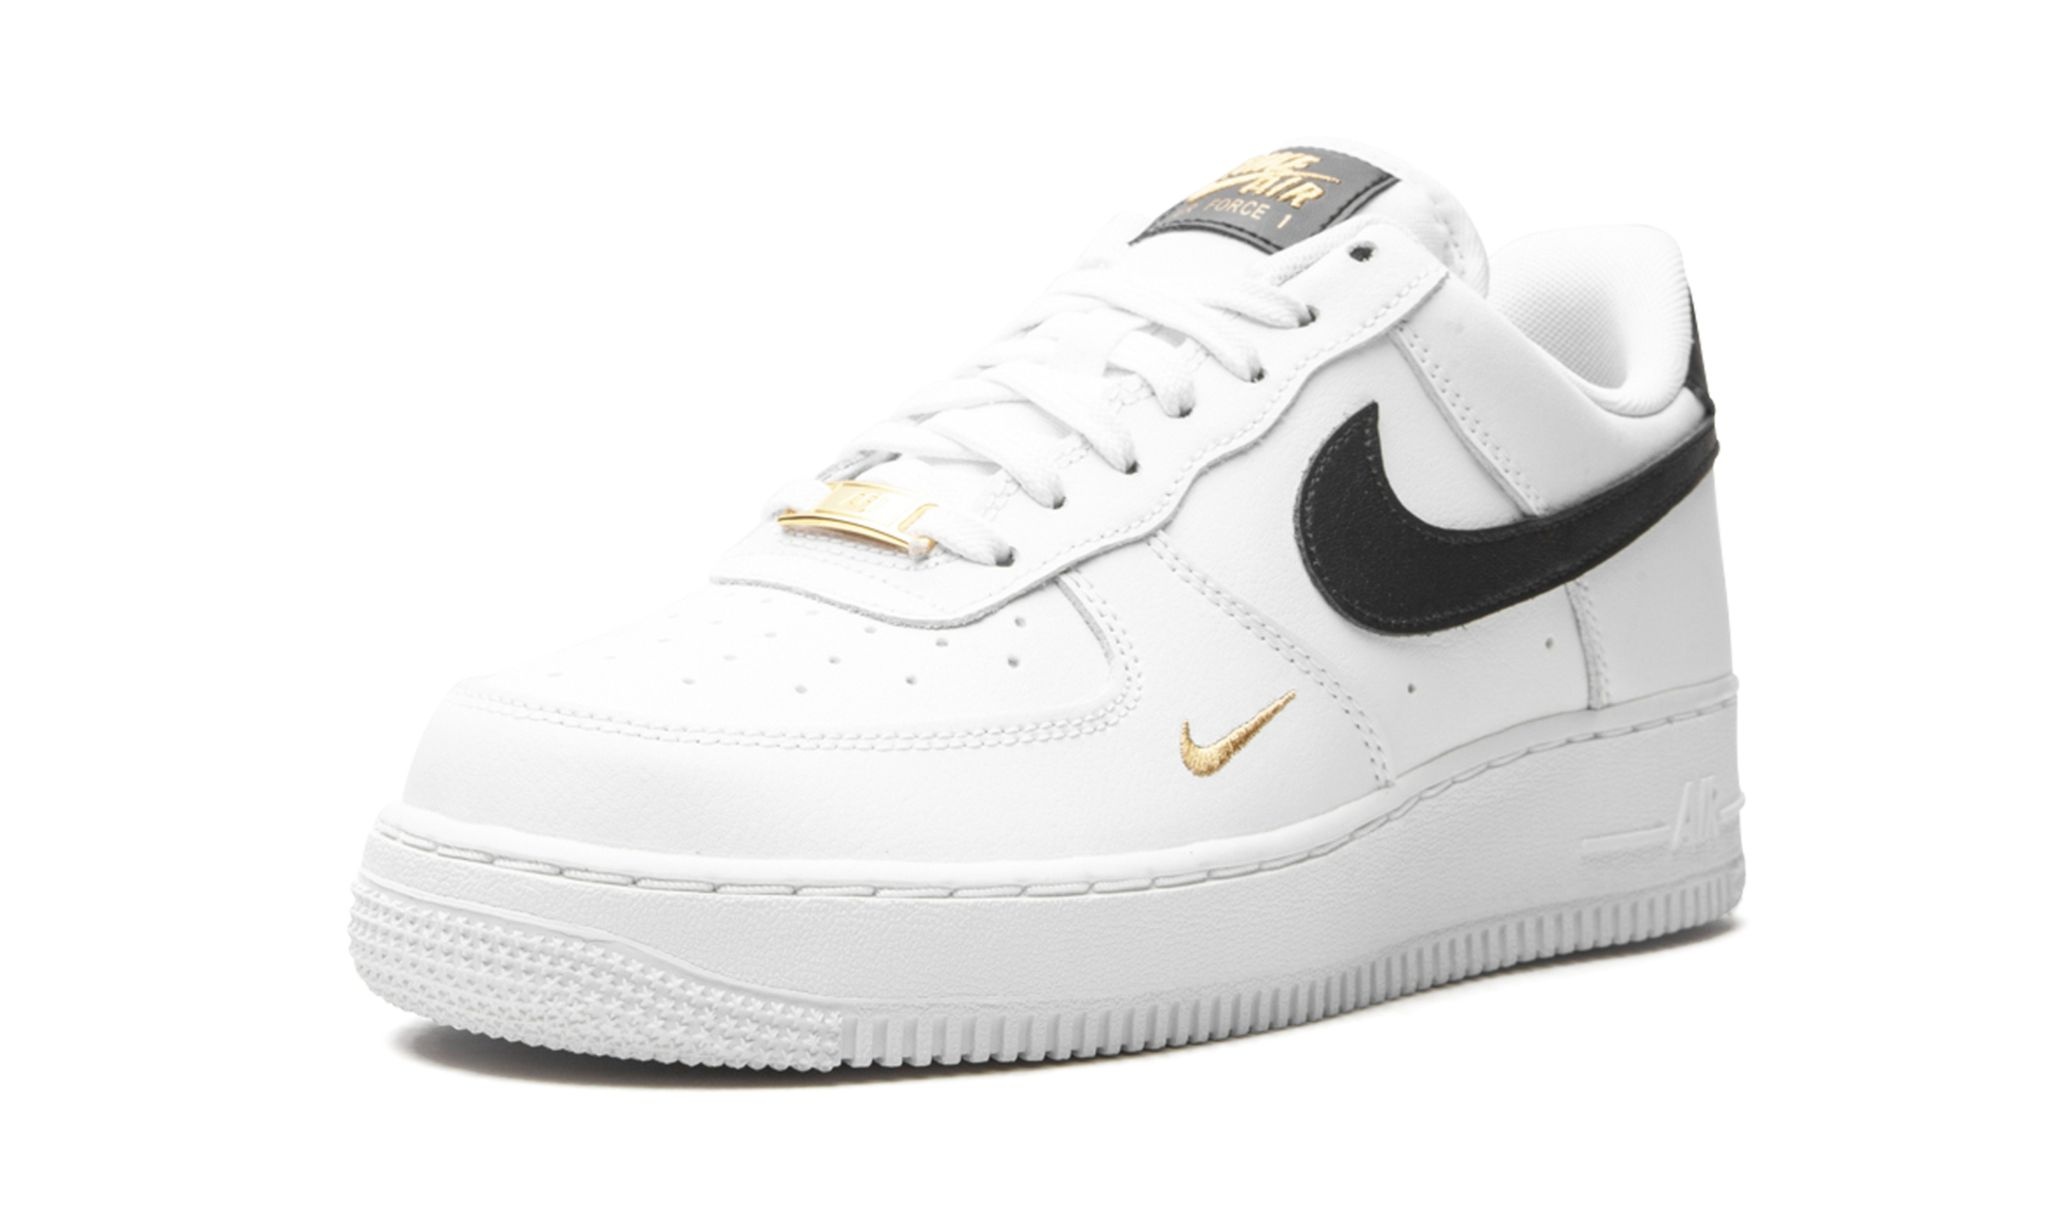 WMNS Air Force 1 Low Essential "White / Black / Gold" - 4